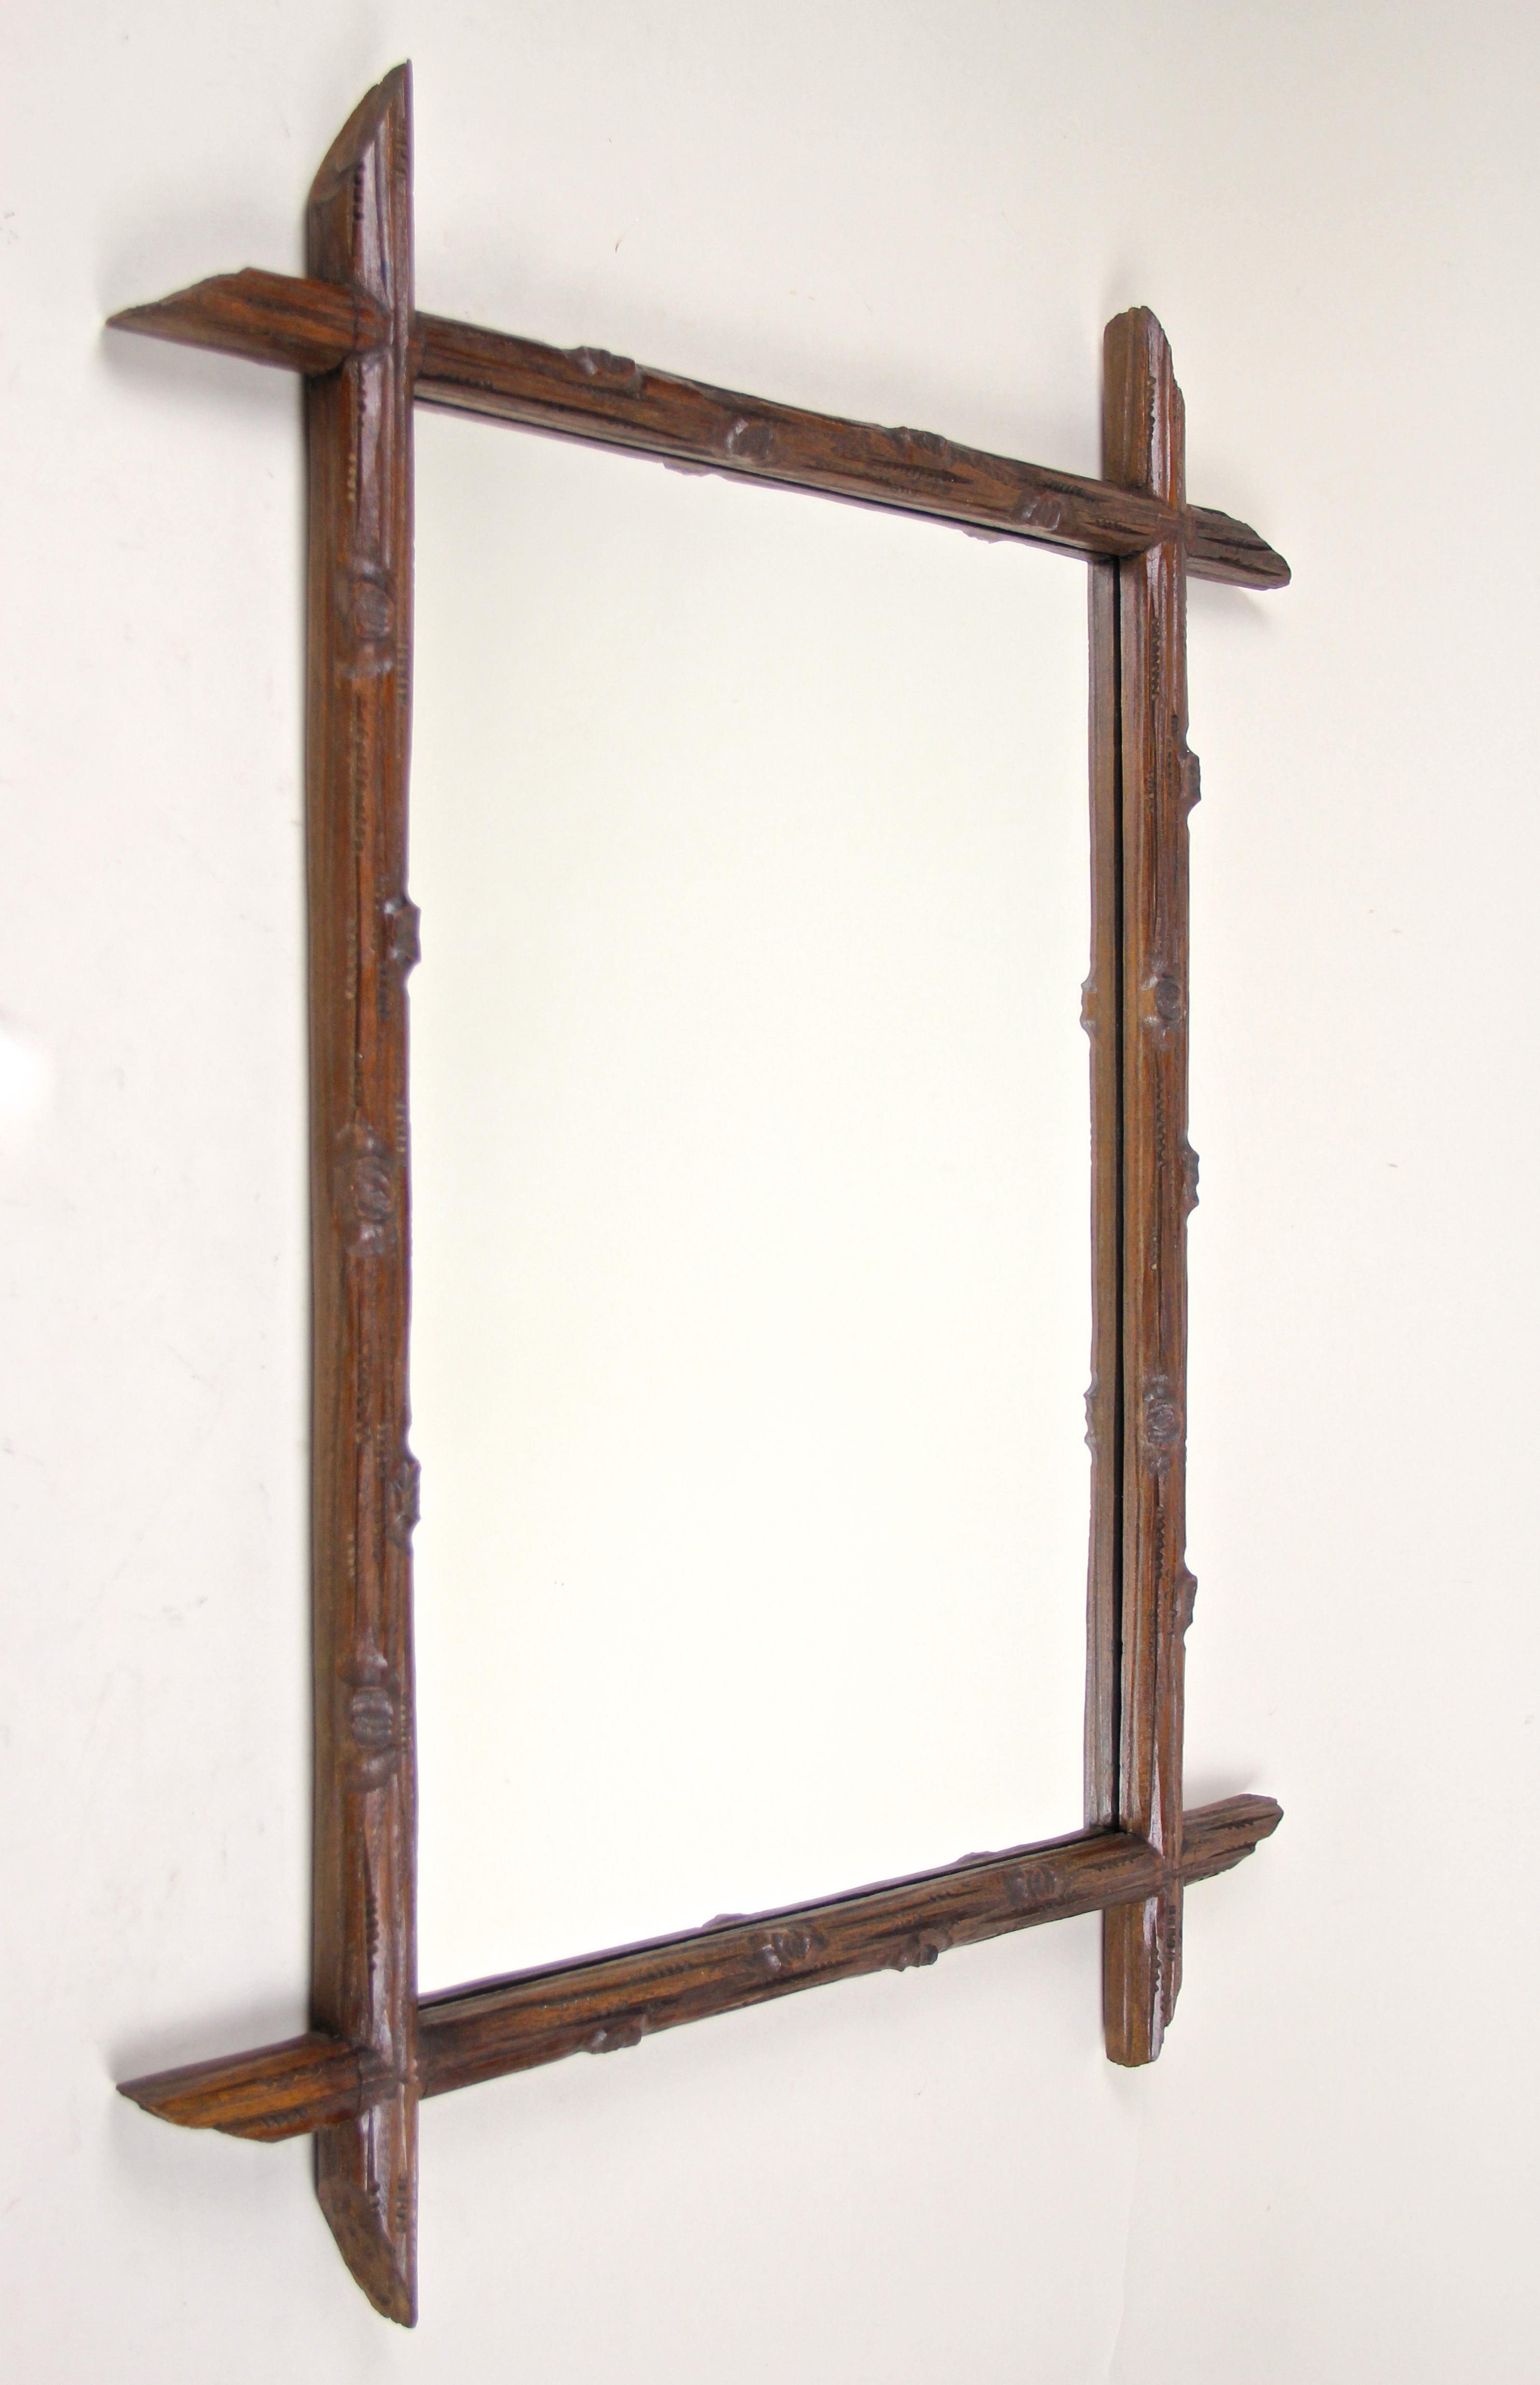 Rustic Black Forest wall mirror from Austria, circa 1880. This lovely antique wall mirror impresses with a simple but elegant 